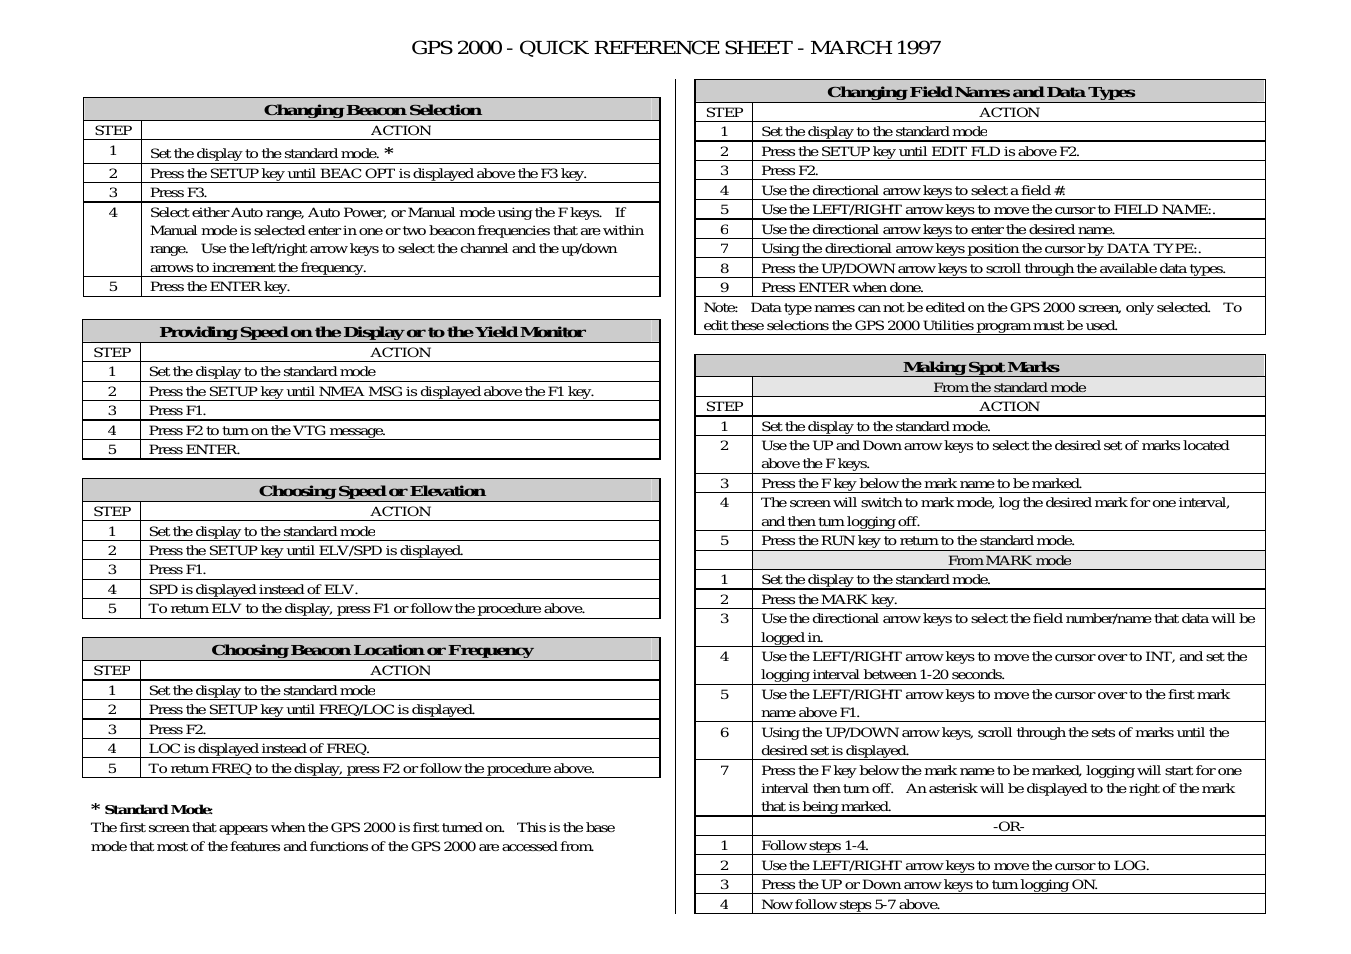 GPS 2000 Quick Reference Guides